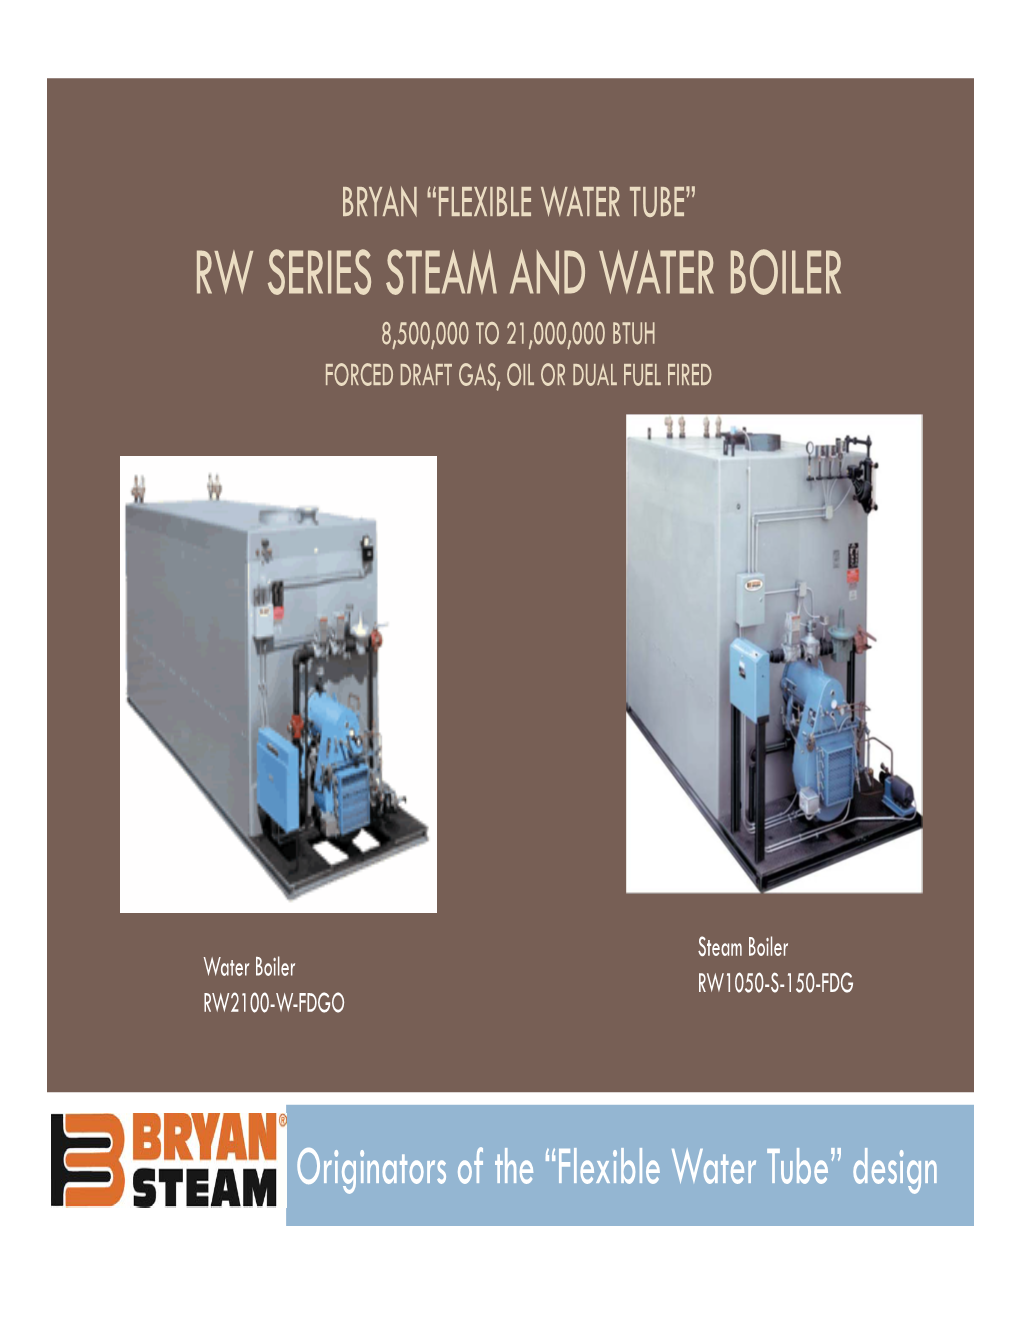 Rw Series Steam and Water Boiler 8,500,000 to 21,000,000 Btuh Forced Draft Gas, Oil Or Dual Fuel Fired